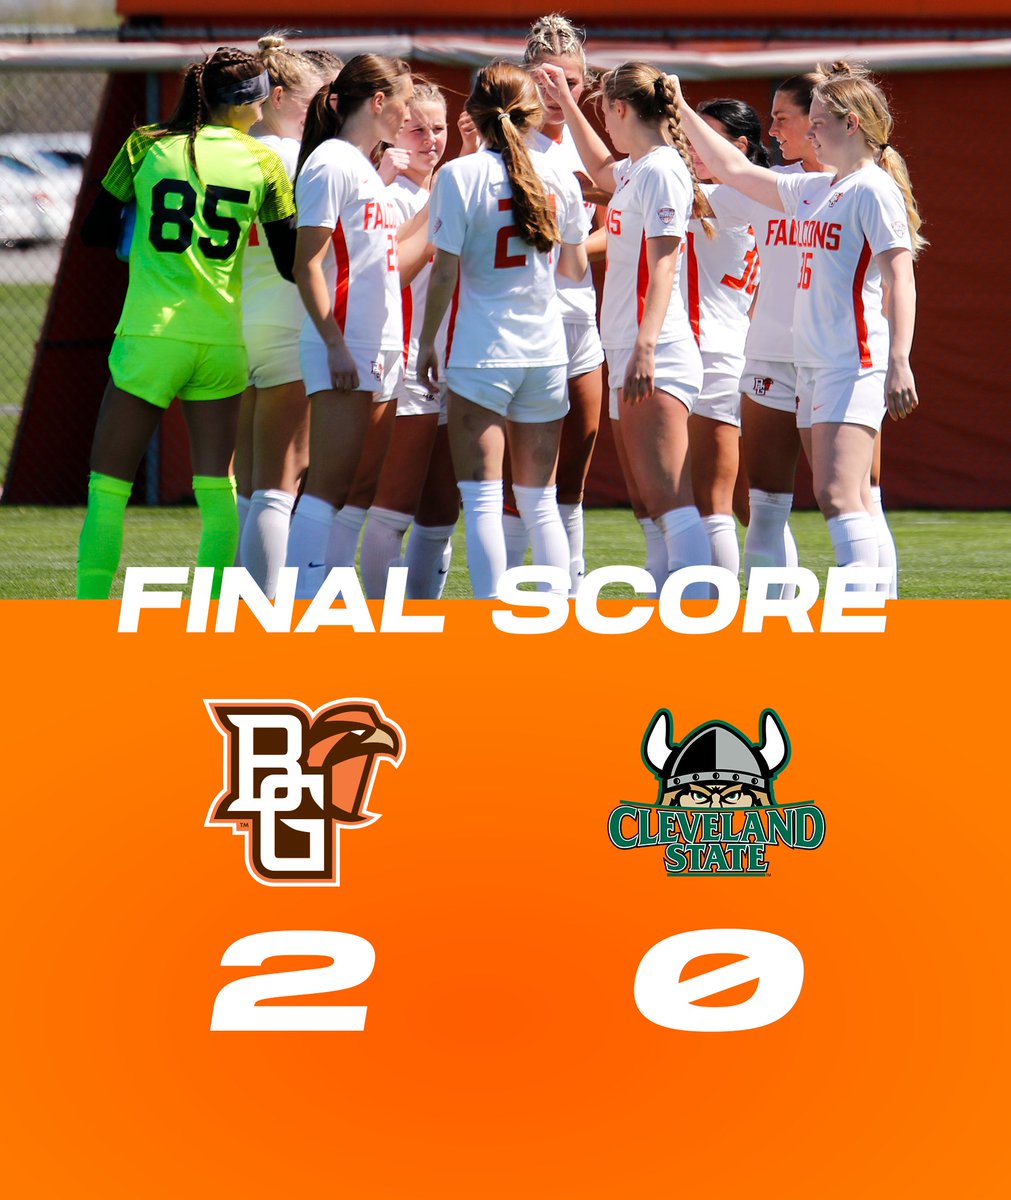 That’s a wrap on the spring season! Great to end with a home win!

#AyZiggy